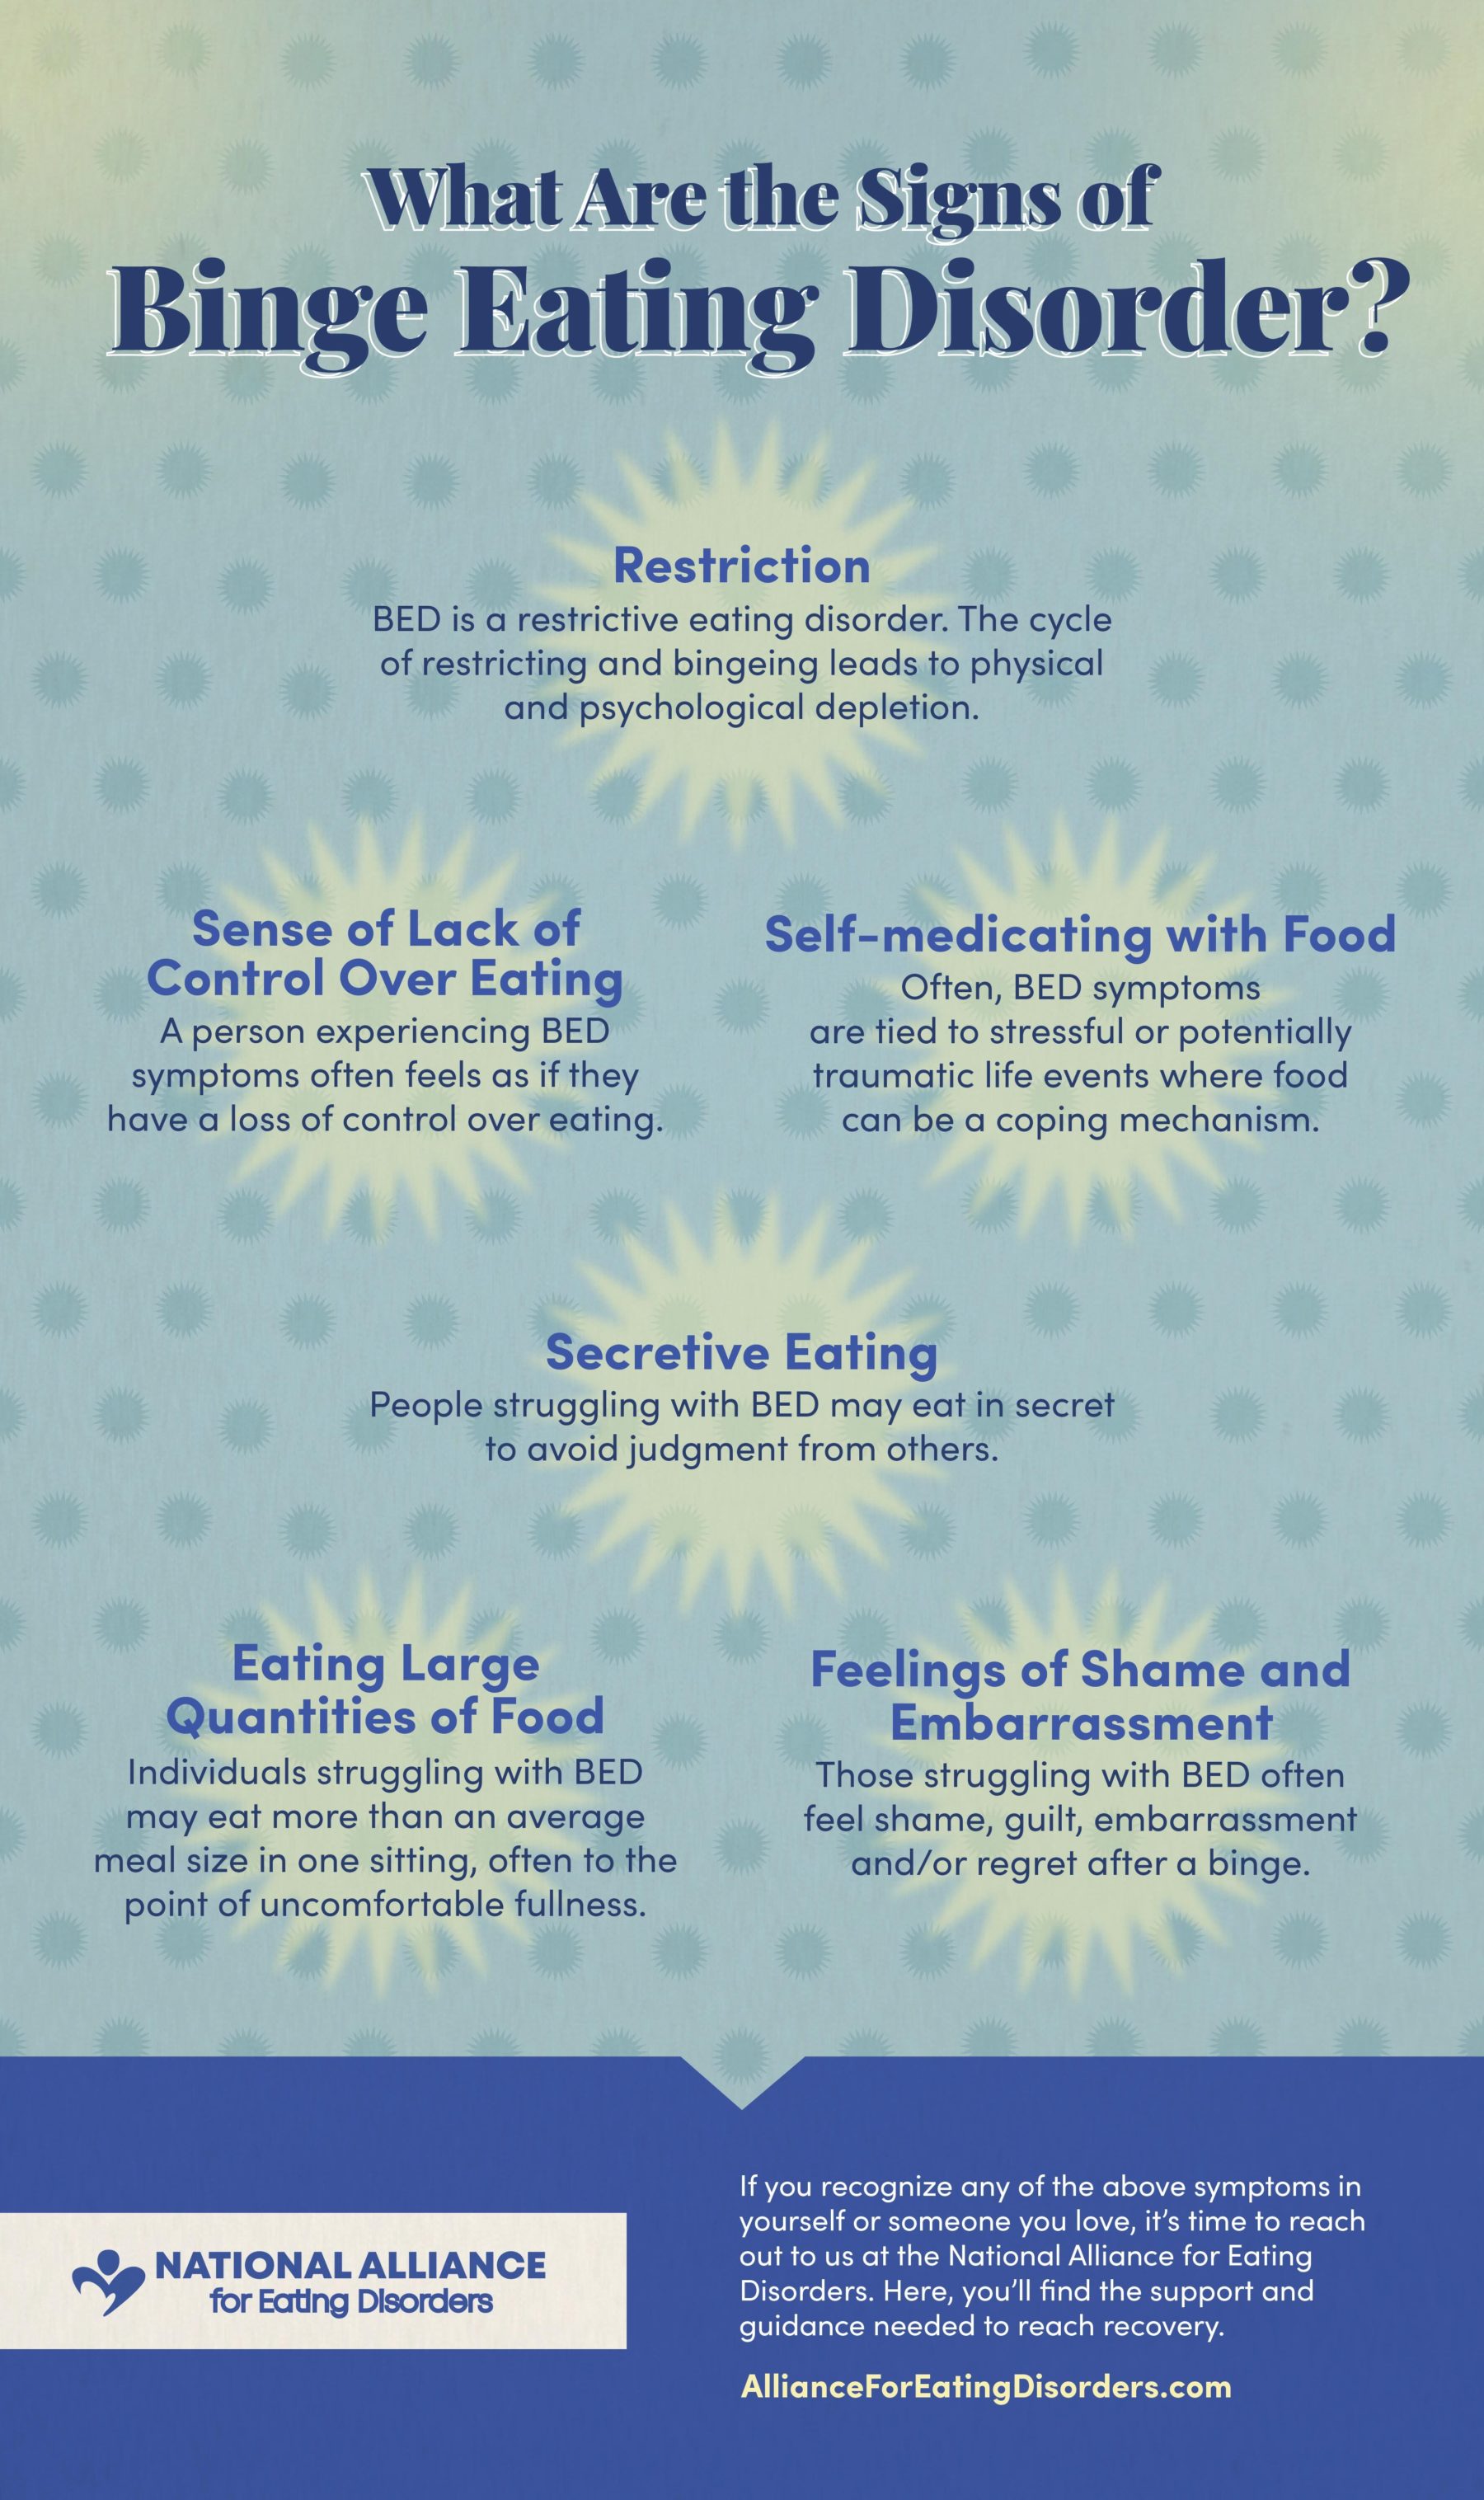 what are the signs and symptoms of binge eating disorder (BED)?